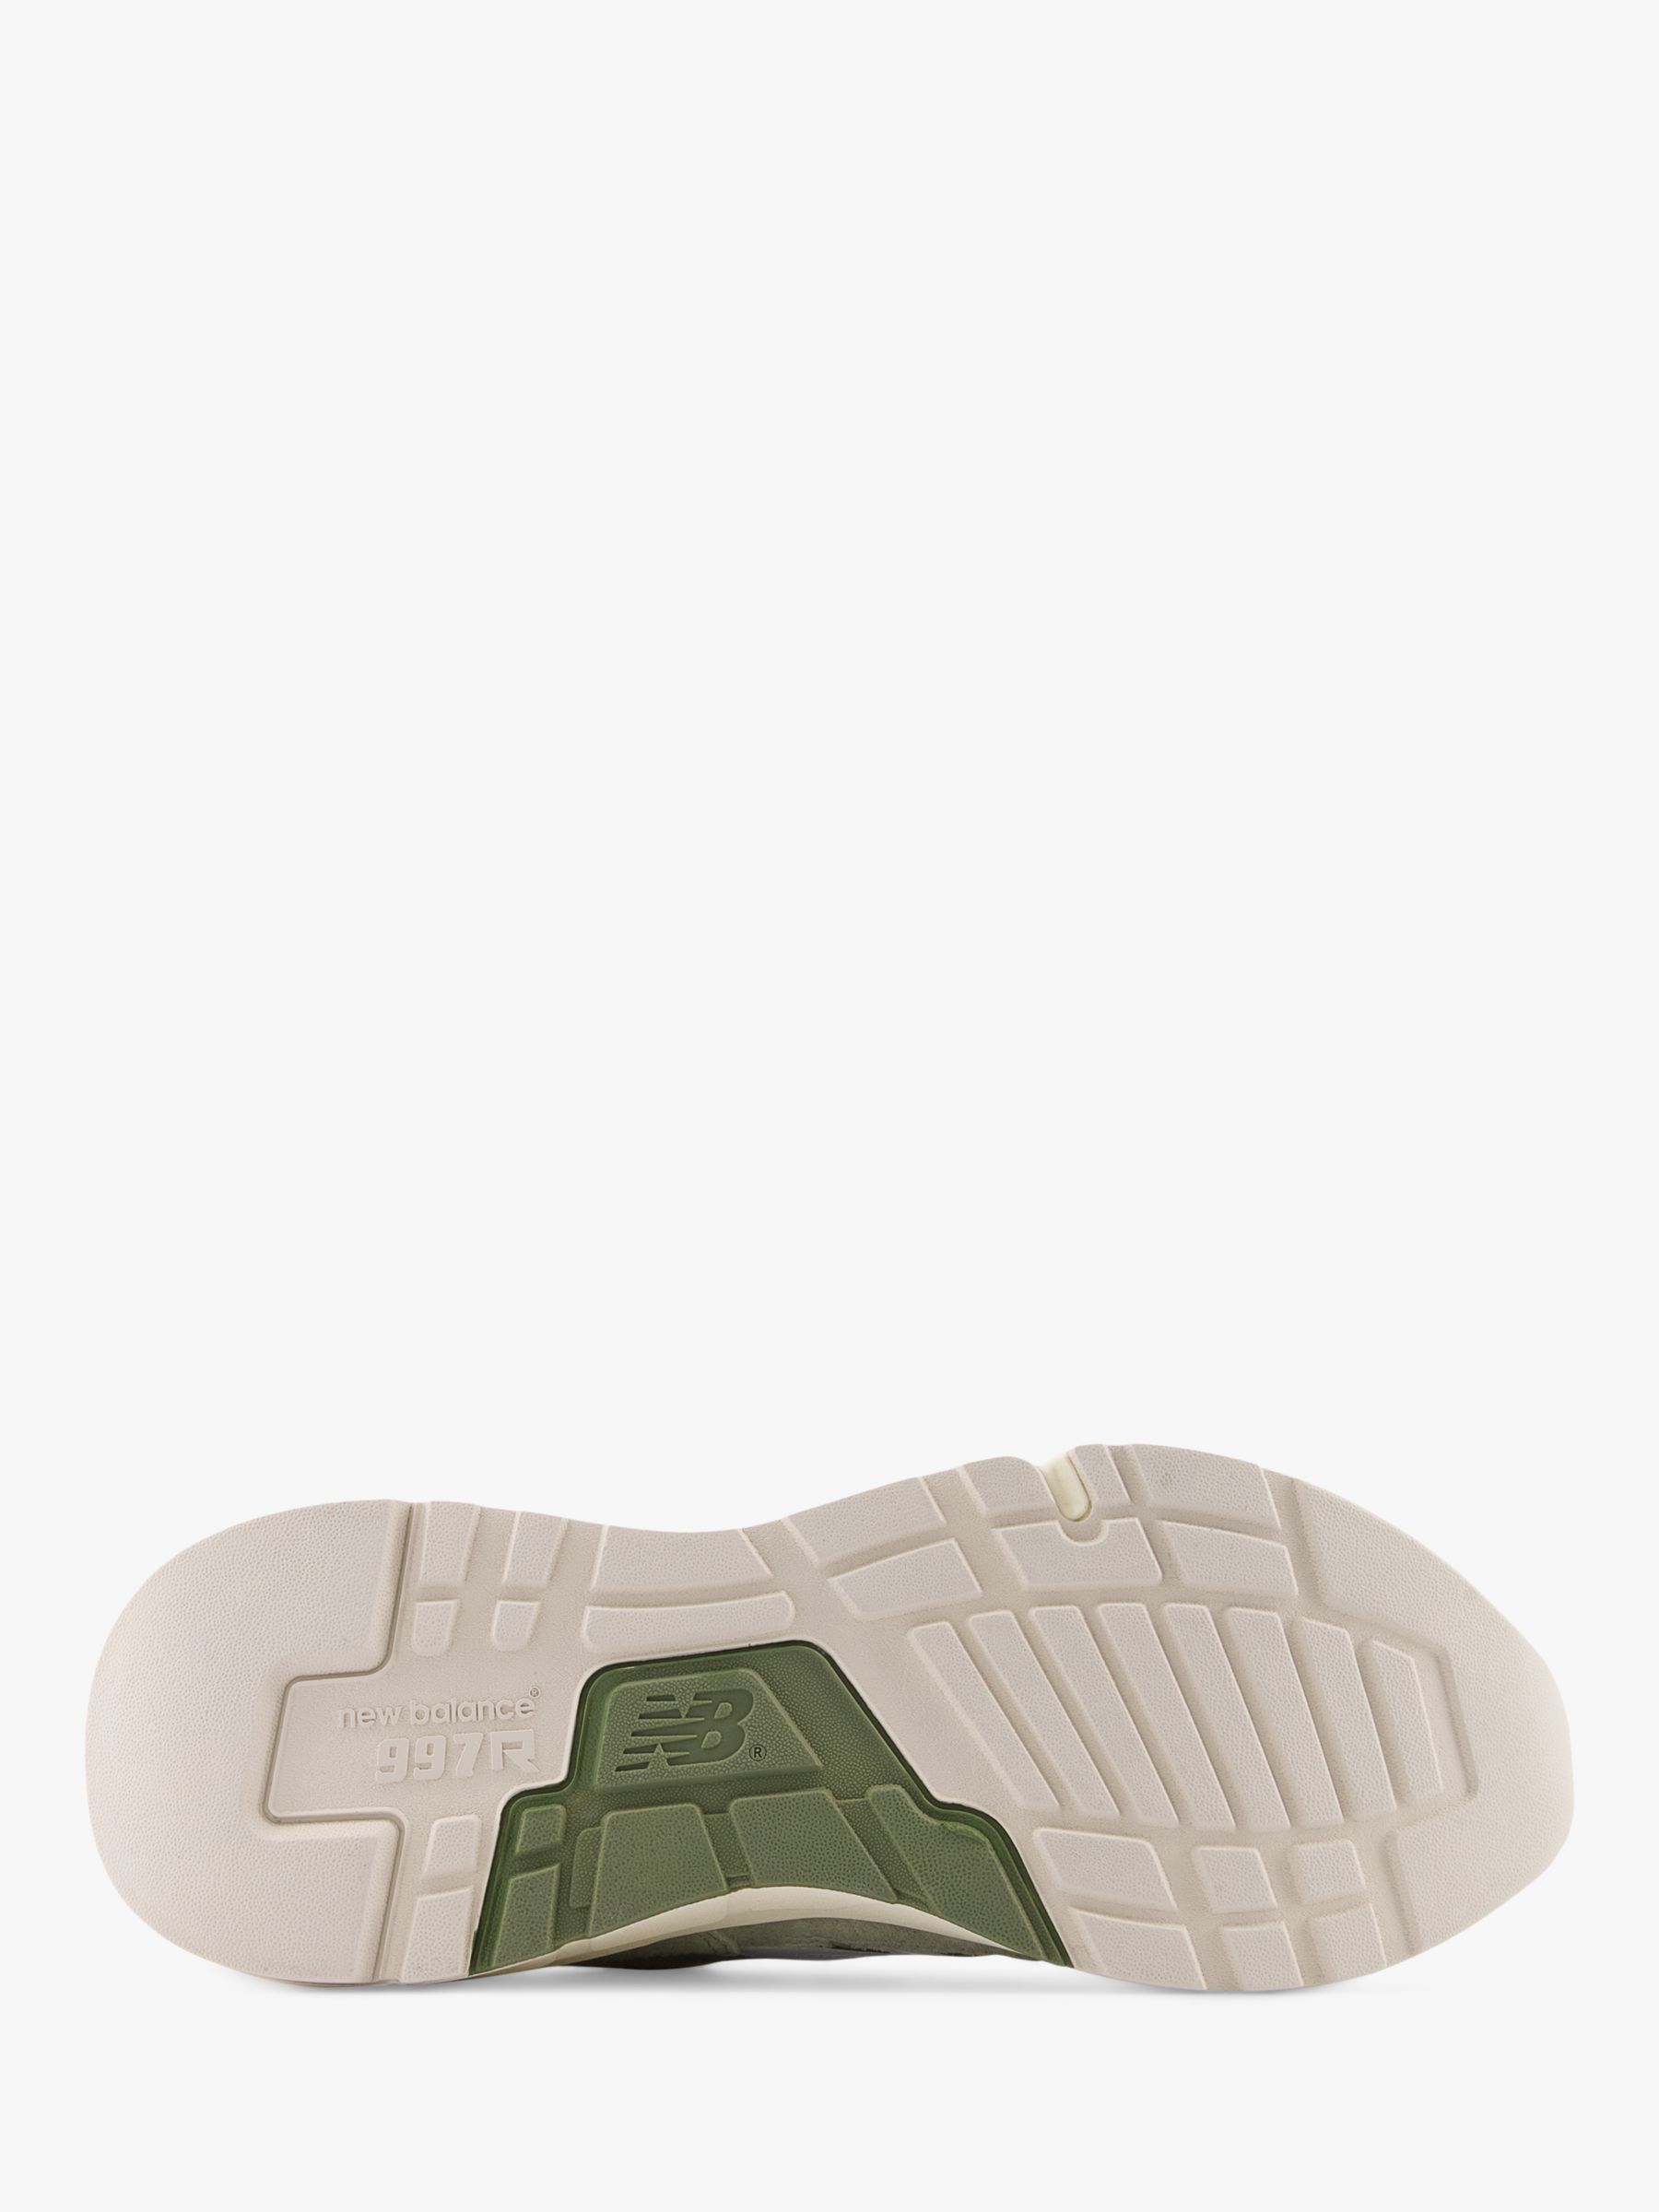 New Balance 997R Suede Trainers, Green at John Lewis & Partners